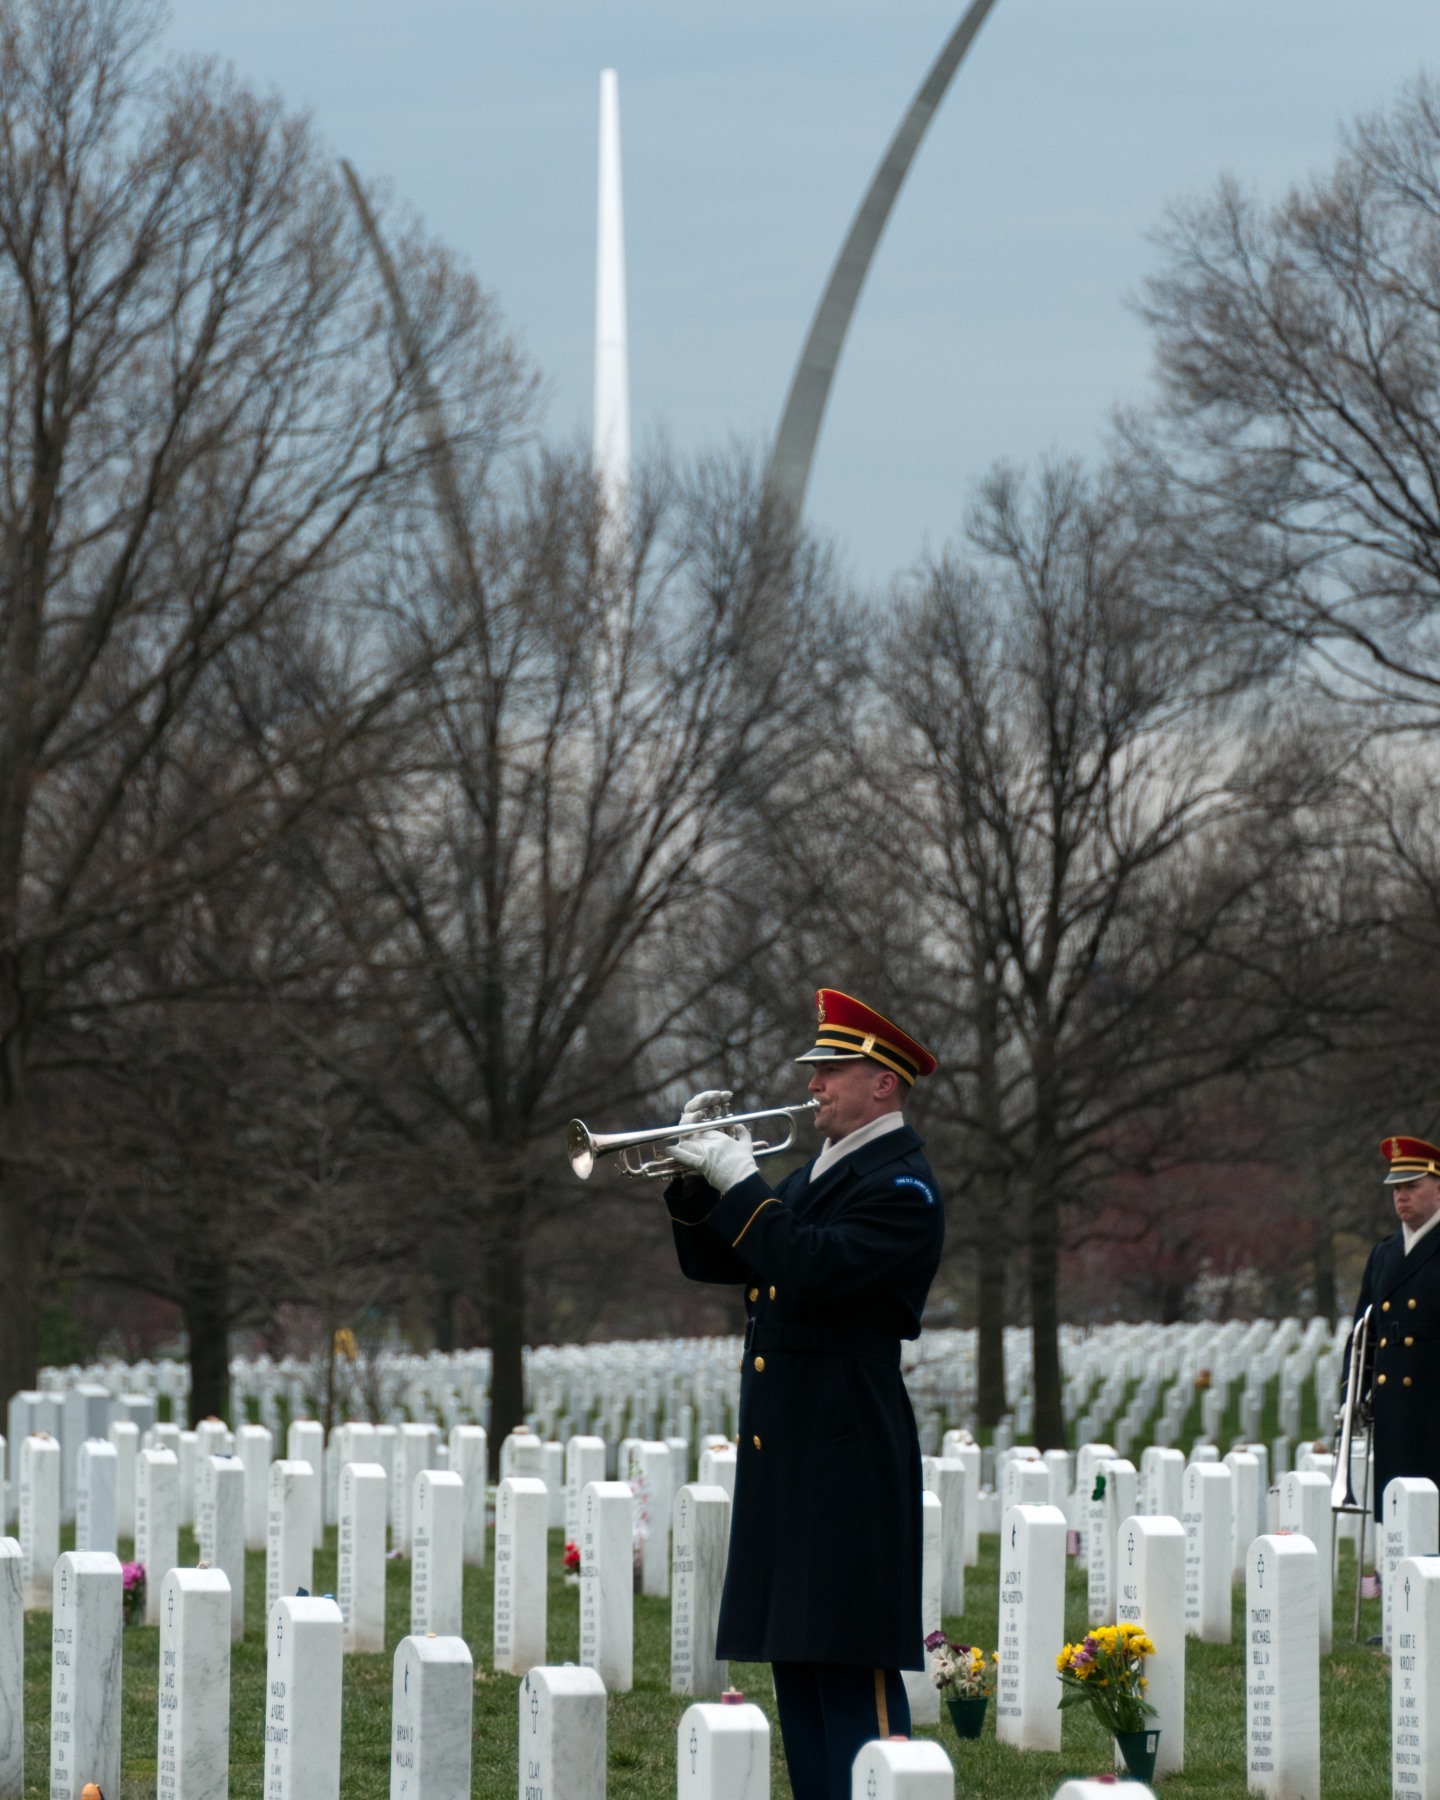 A US Army Band Bugler plays Taps under the shadow of the US Air Force Memorial.

The Air Force Memorial structures represent the long history of air and space aviation from the balloon reconnaissance, through Orville Wright’s first military flight at Fort Myers, to the Air Force of today. The Air Force Memorial provides a visual representation of the cumulative history of the United States Air Force. The Air Force Memorial uses design, inscriptions and sculpture to represent the Air Force heritage including those intrepid pioneers in balloon reconnaissance and the advent of manned flight in air and space.

The design of the Air Force Memorial symbolizes reaching for the stars, soaring above the earth and executing a bomb burst maneuver, best demonstrated by the United States Air Force Thunderbirds. Our tribute and honor to the Airmen heritage is represented in the 8-foot tall bronze United States Air Force Honor Guard, standing watch over the Memorial grounds.